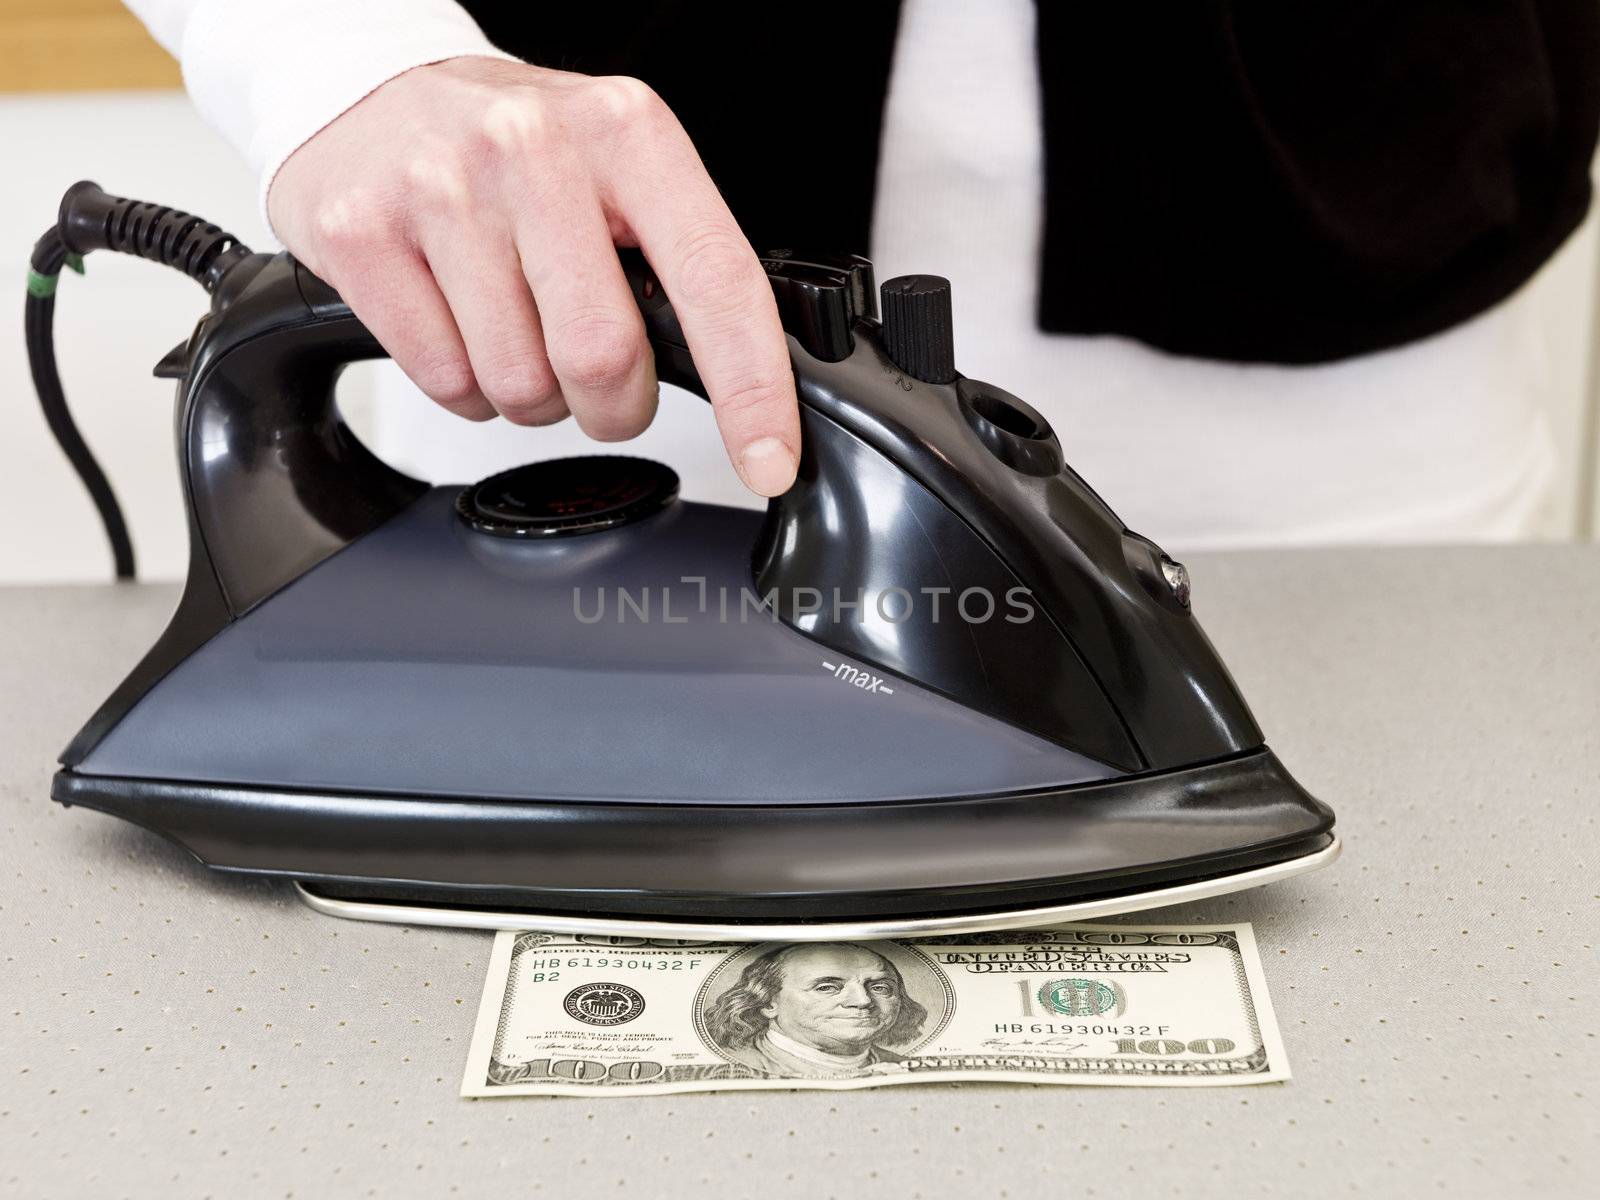 Ironing a hundred dollar bank note